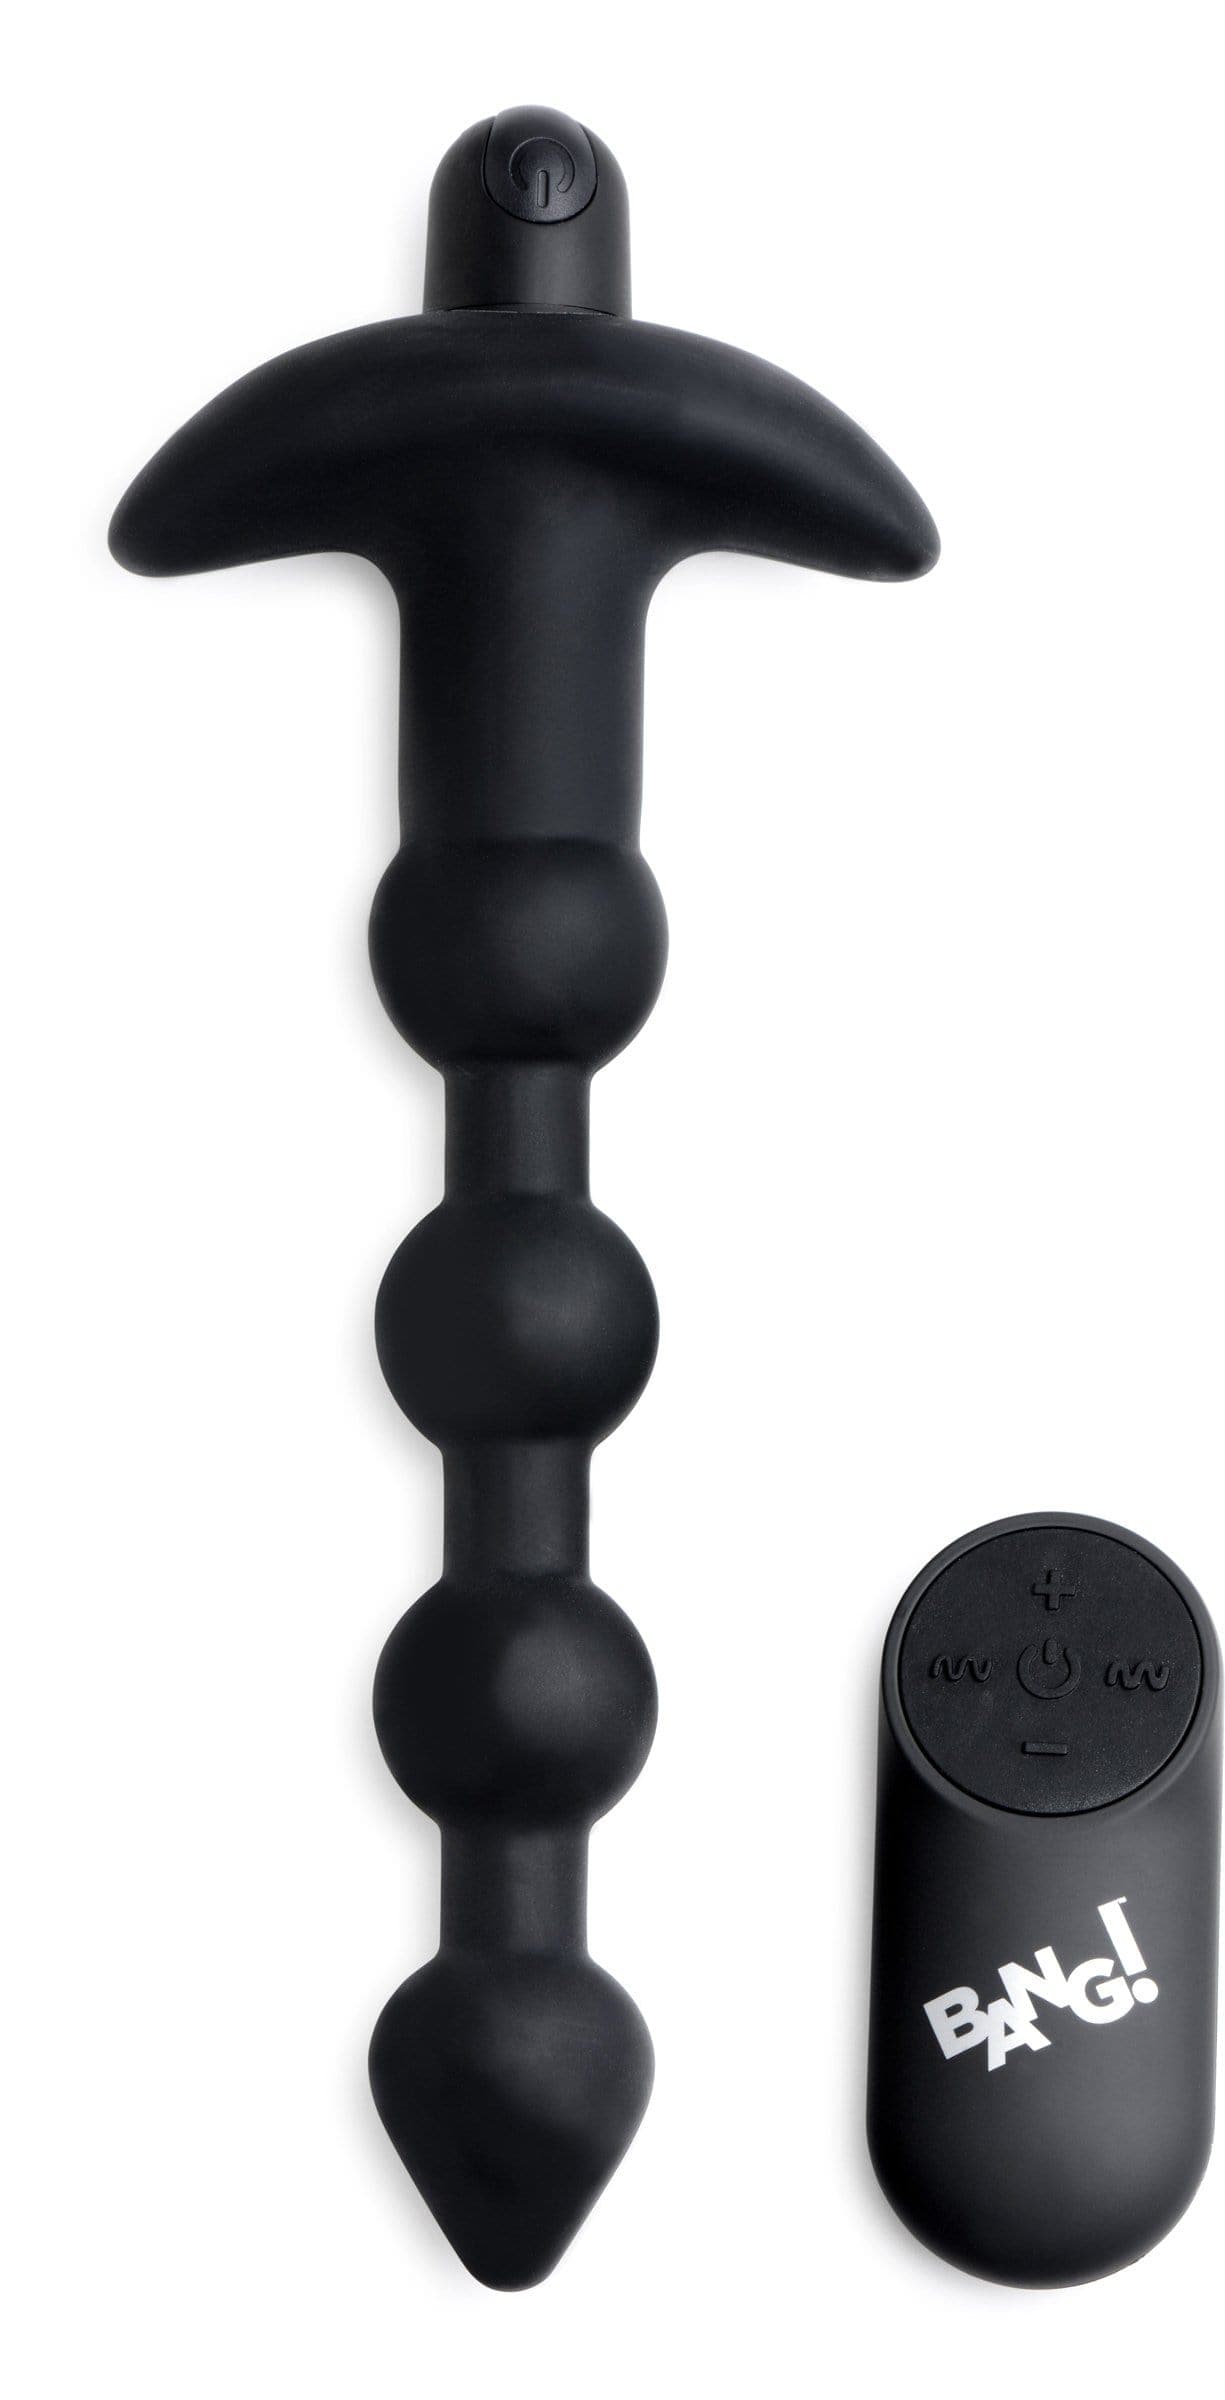 bang vibrating silicone anal beads and remote black